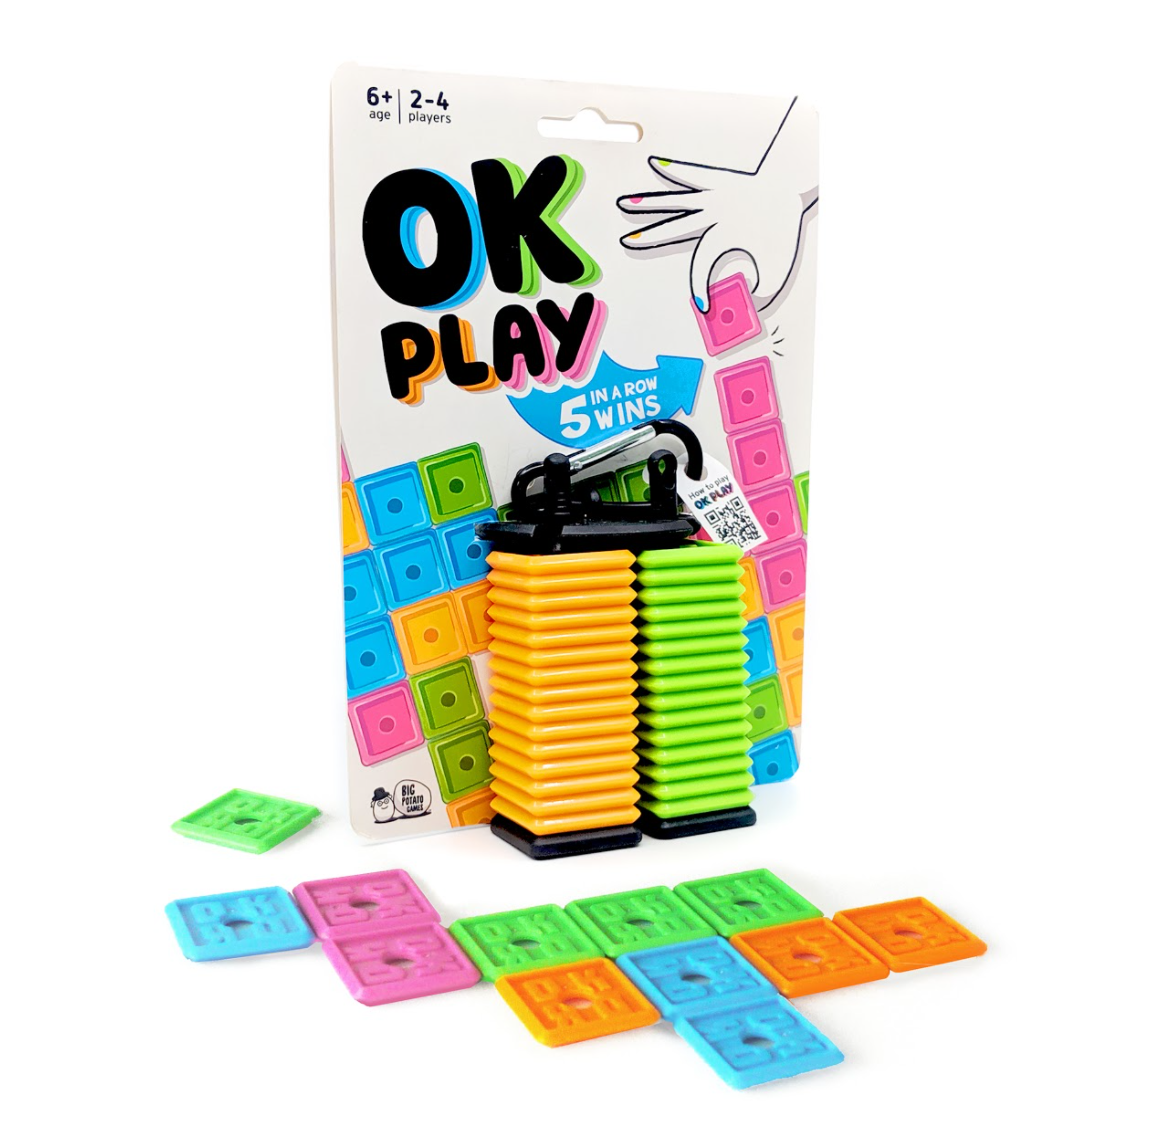 ok play package and contents